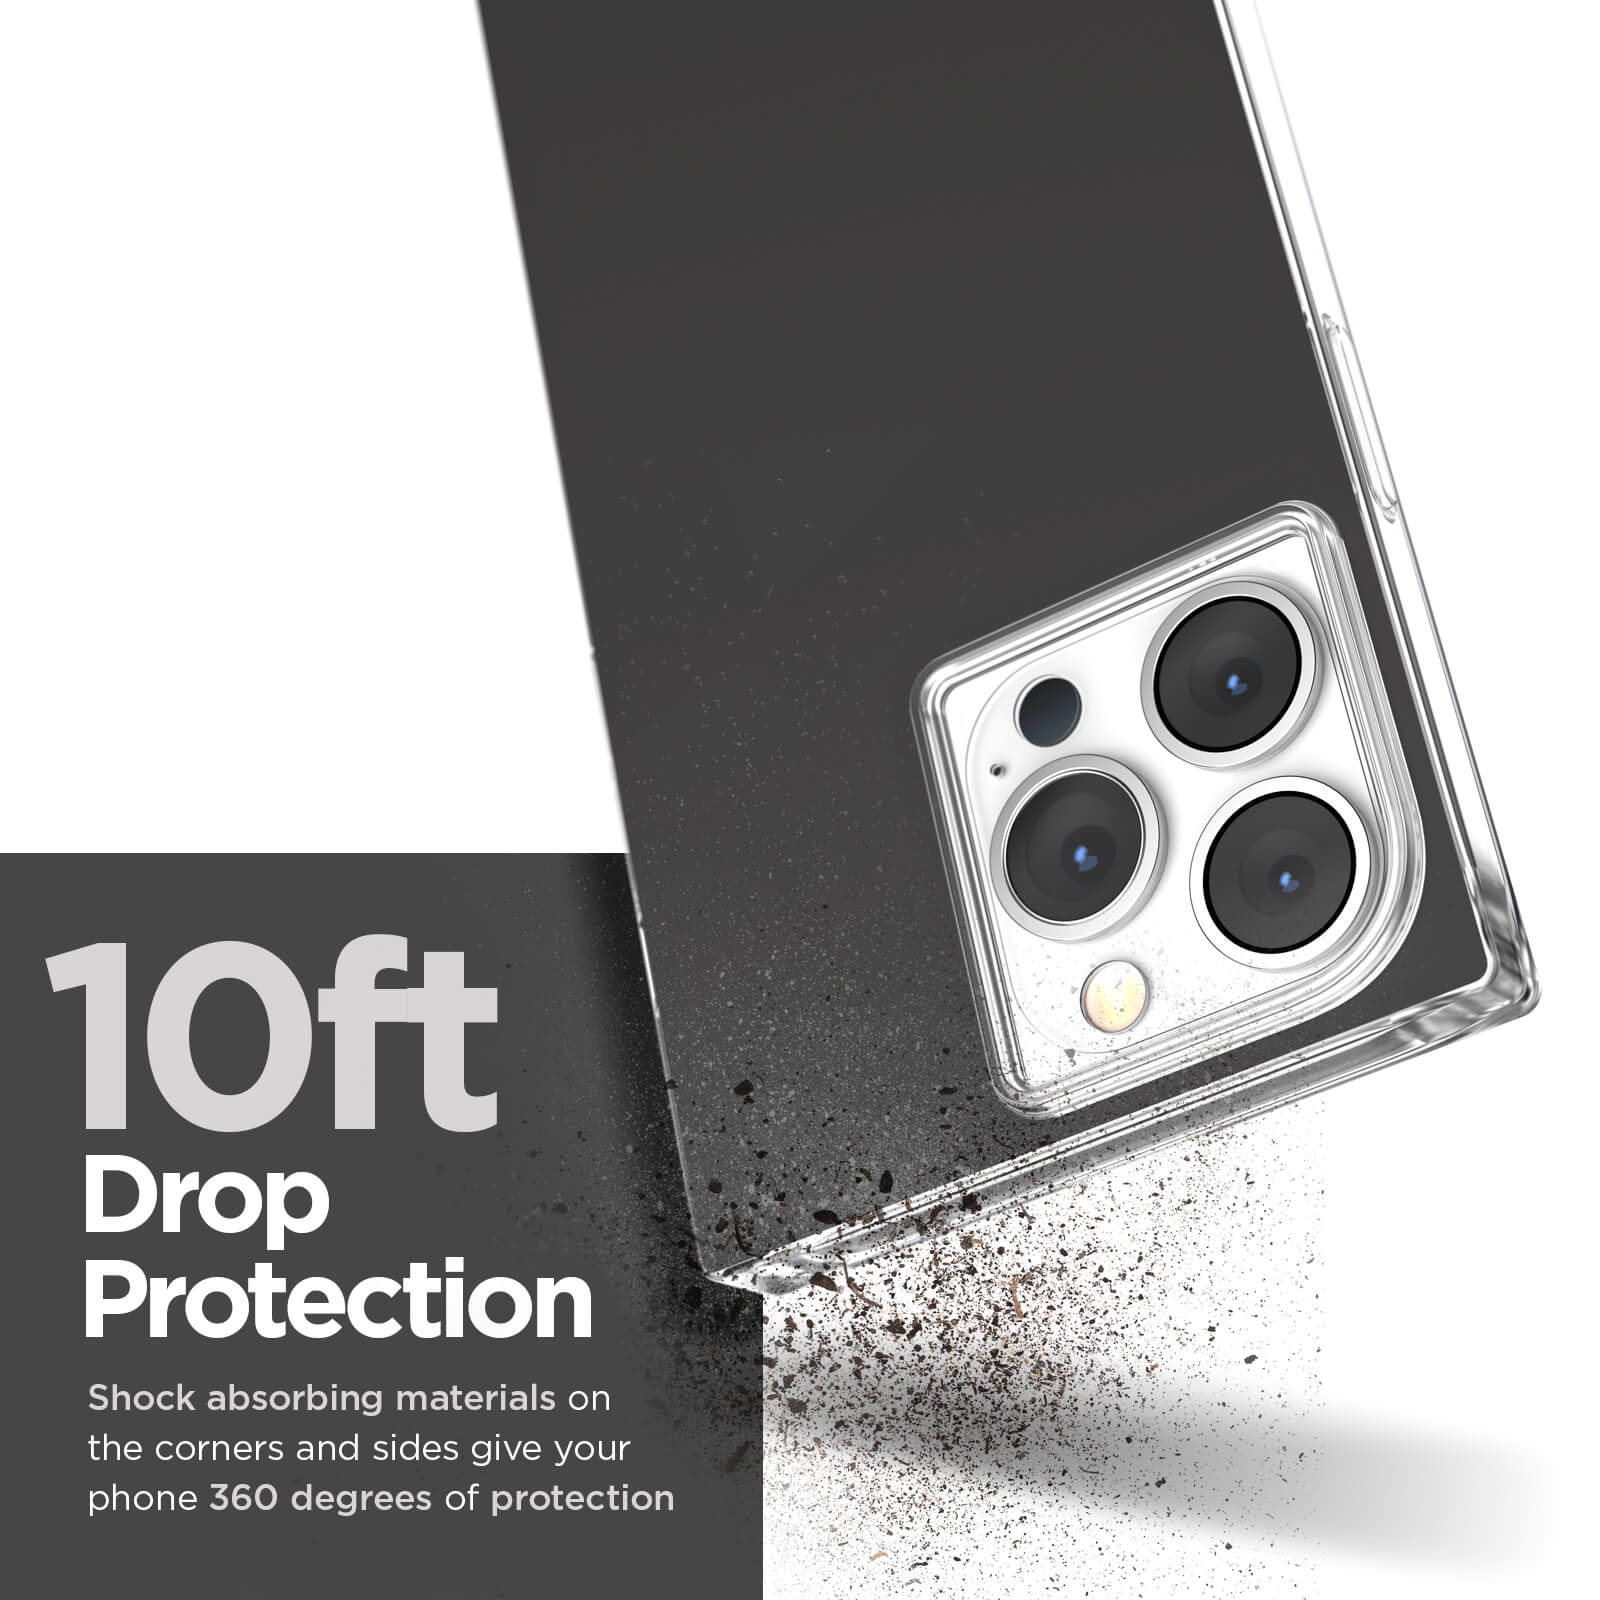 10ft drop protection. Shock absorbing materials on the corners and sides give your phone 360 degrees of protection. color::Black